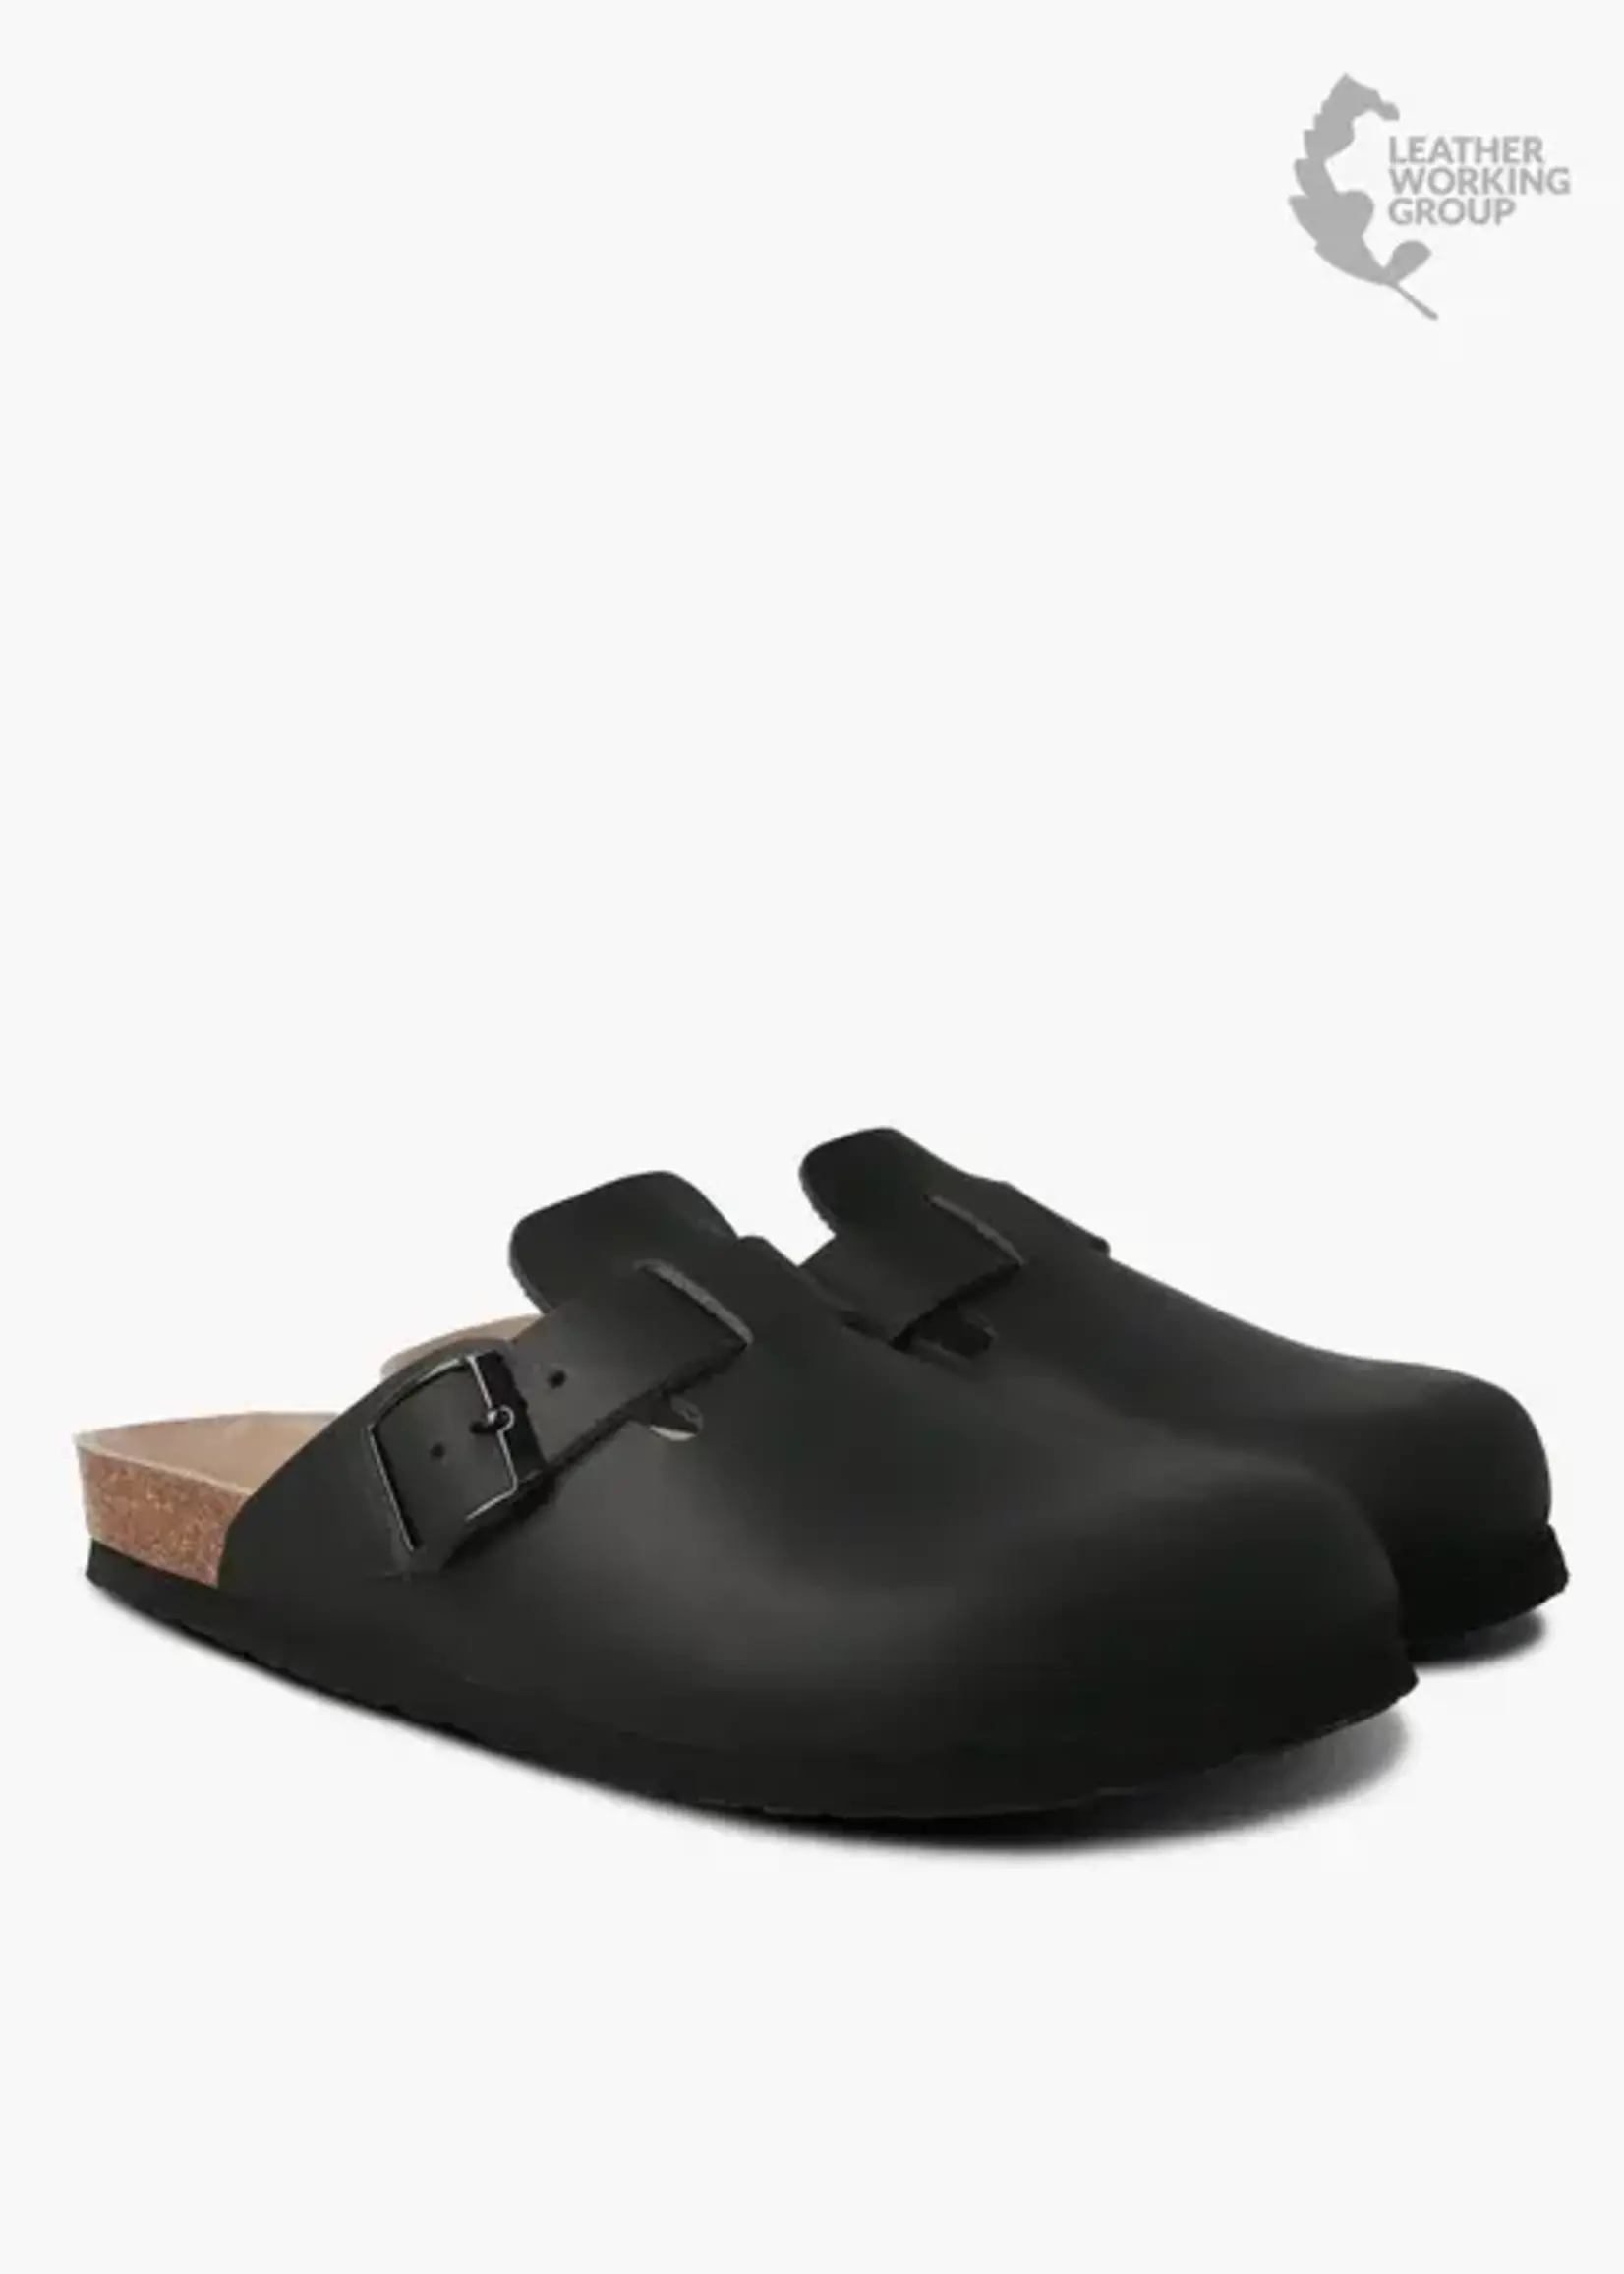 GENUINS RIVA leather clog